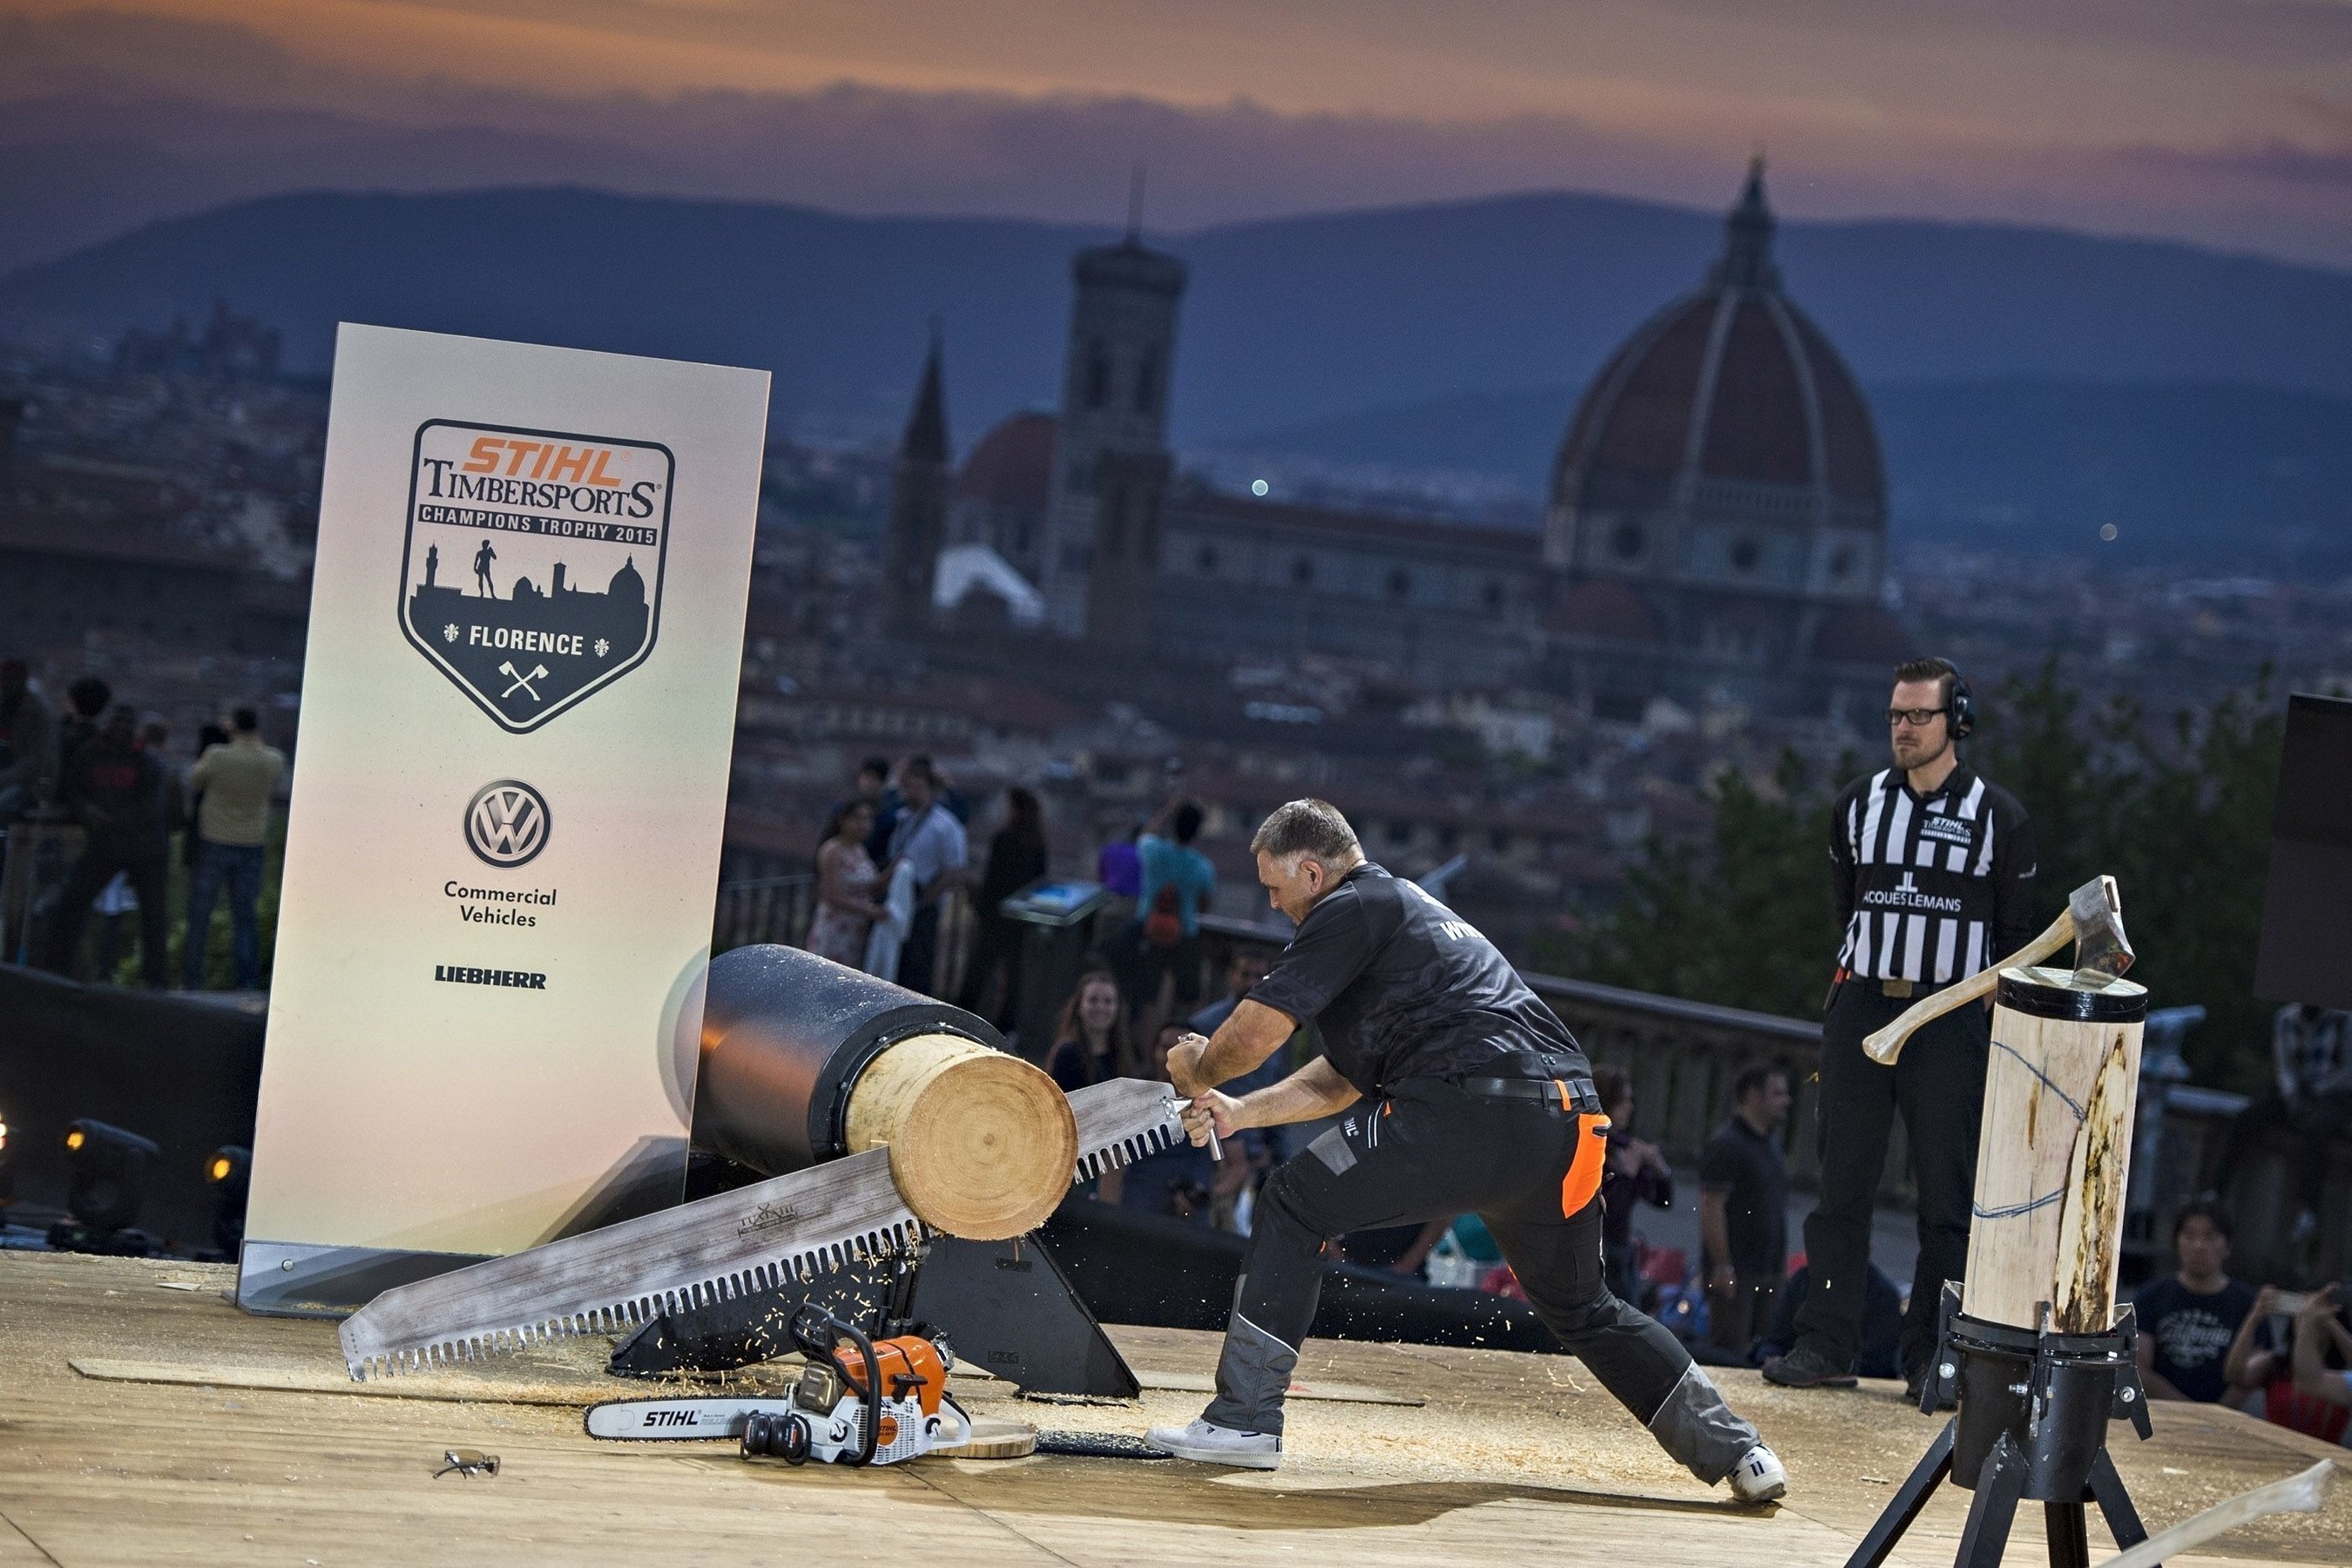 Third placed in the Champions Trophy and six times STIHL TIMBERSPORTS(R) World Champion, Jason Wynyard, fought for hundredths of a second. (PRNewsFoto/STIHL TIMBERSPORTS Series) (PRNewsFoto/STIHL TIMBERSPORTS Series)